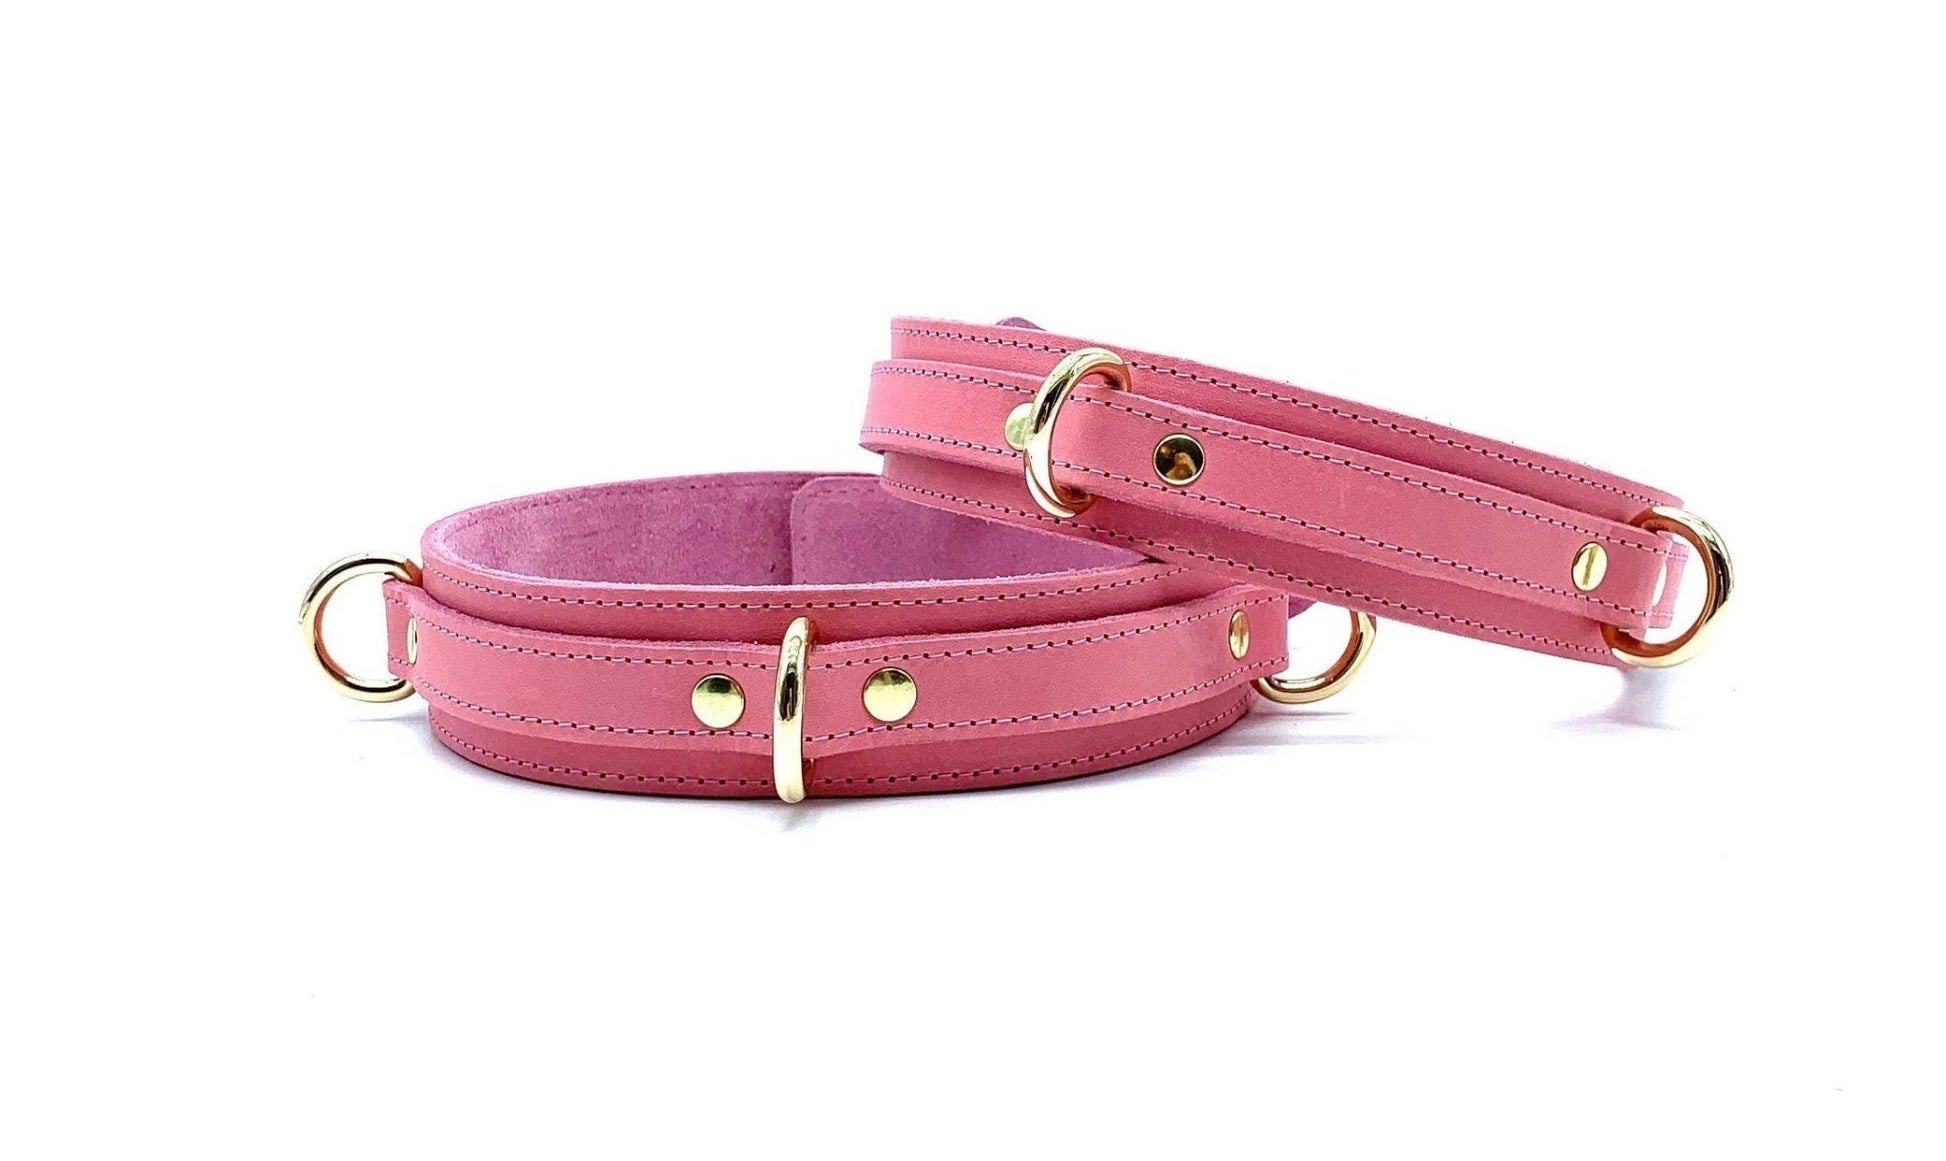 Front view of Tango Pink Italian leather BDSM bondage thigh cuffs, showcasing the vibrant pink leather with polished gold hardware, set against a clean, white background.